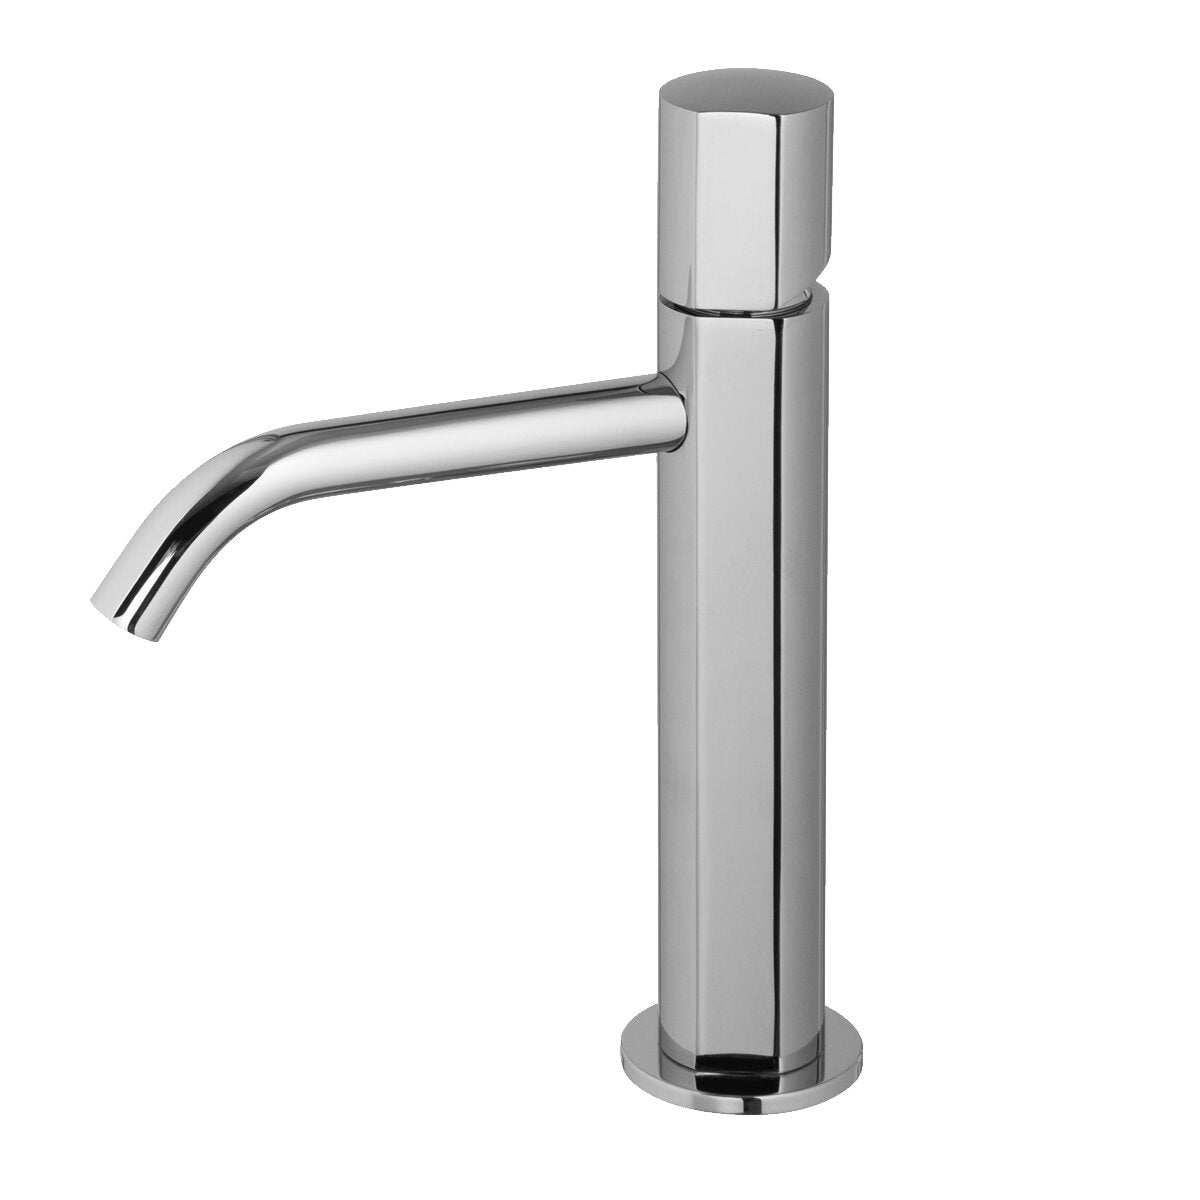 S3 handle for Fima Carlo Frattini mixer So brushed nickel